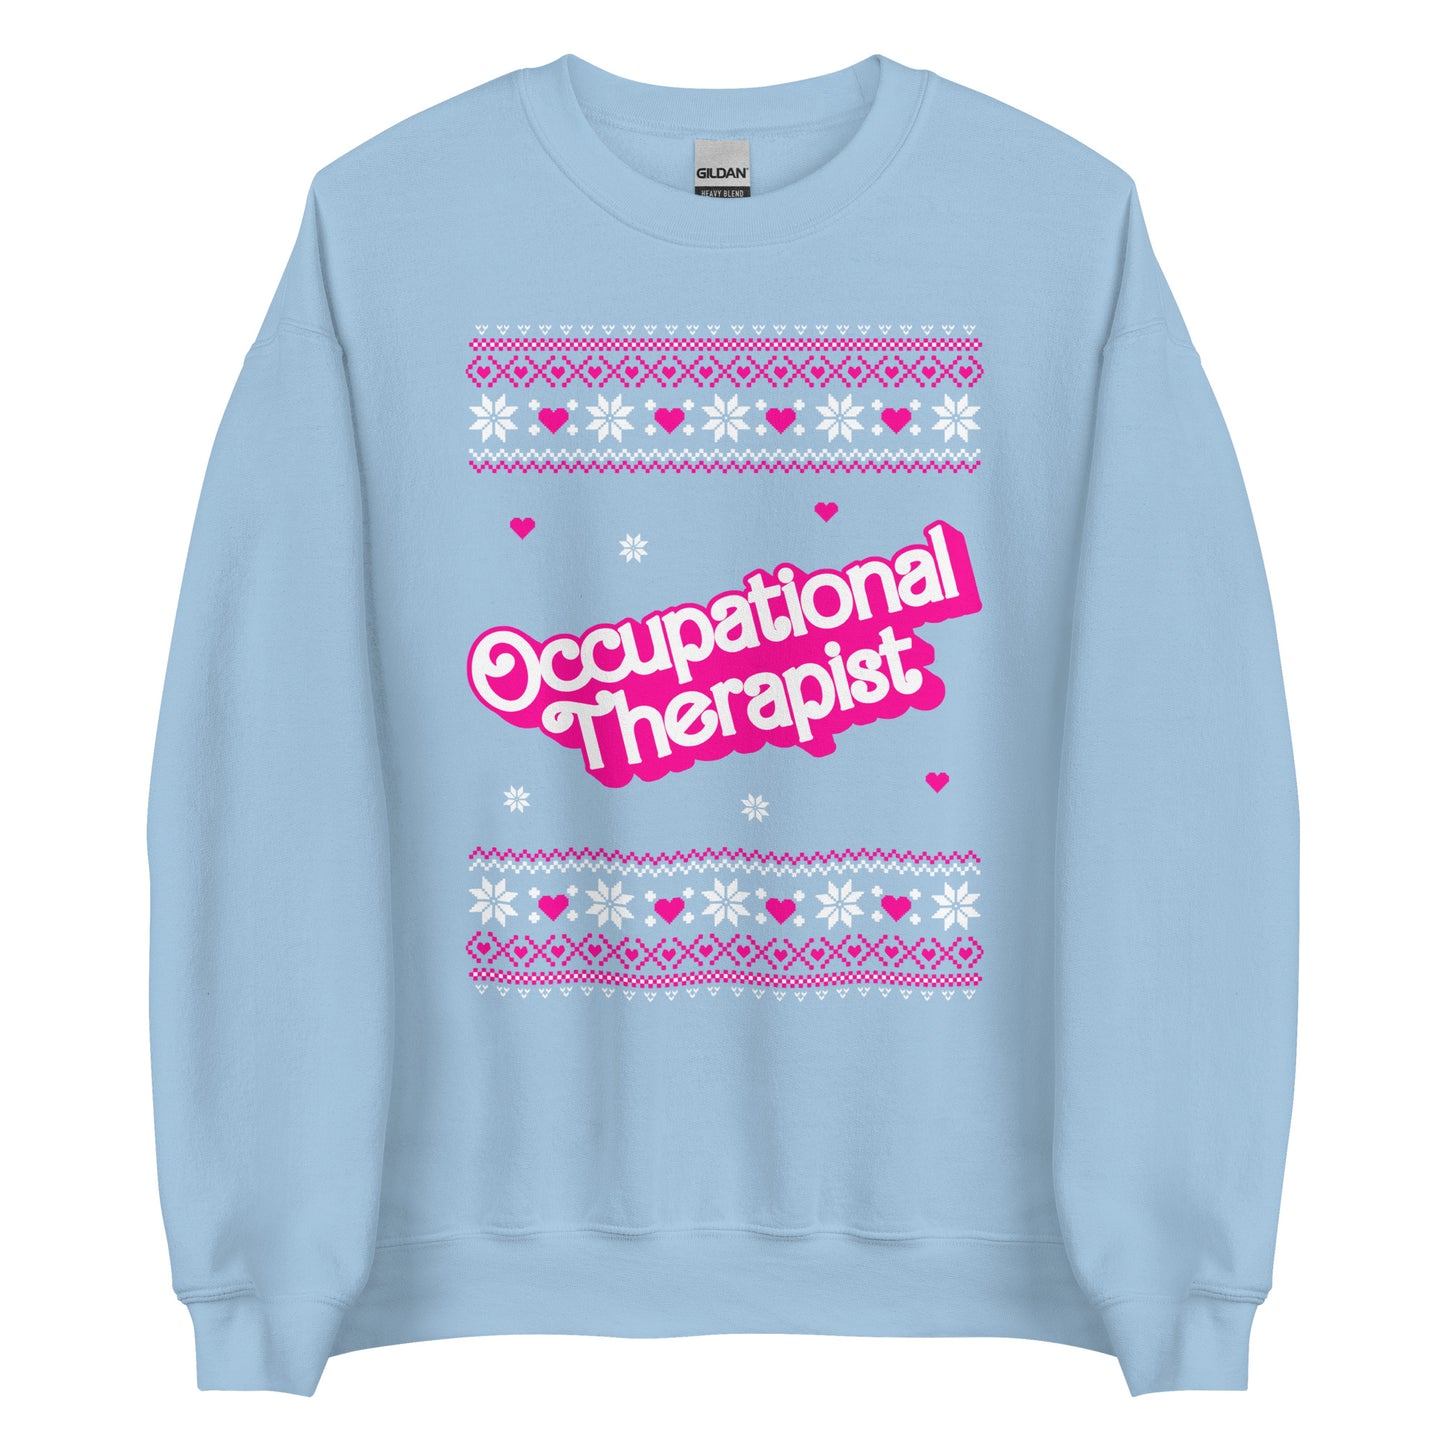 Barbie Occupational Therapist Ugly Christmas Sweater